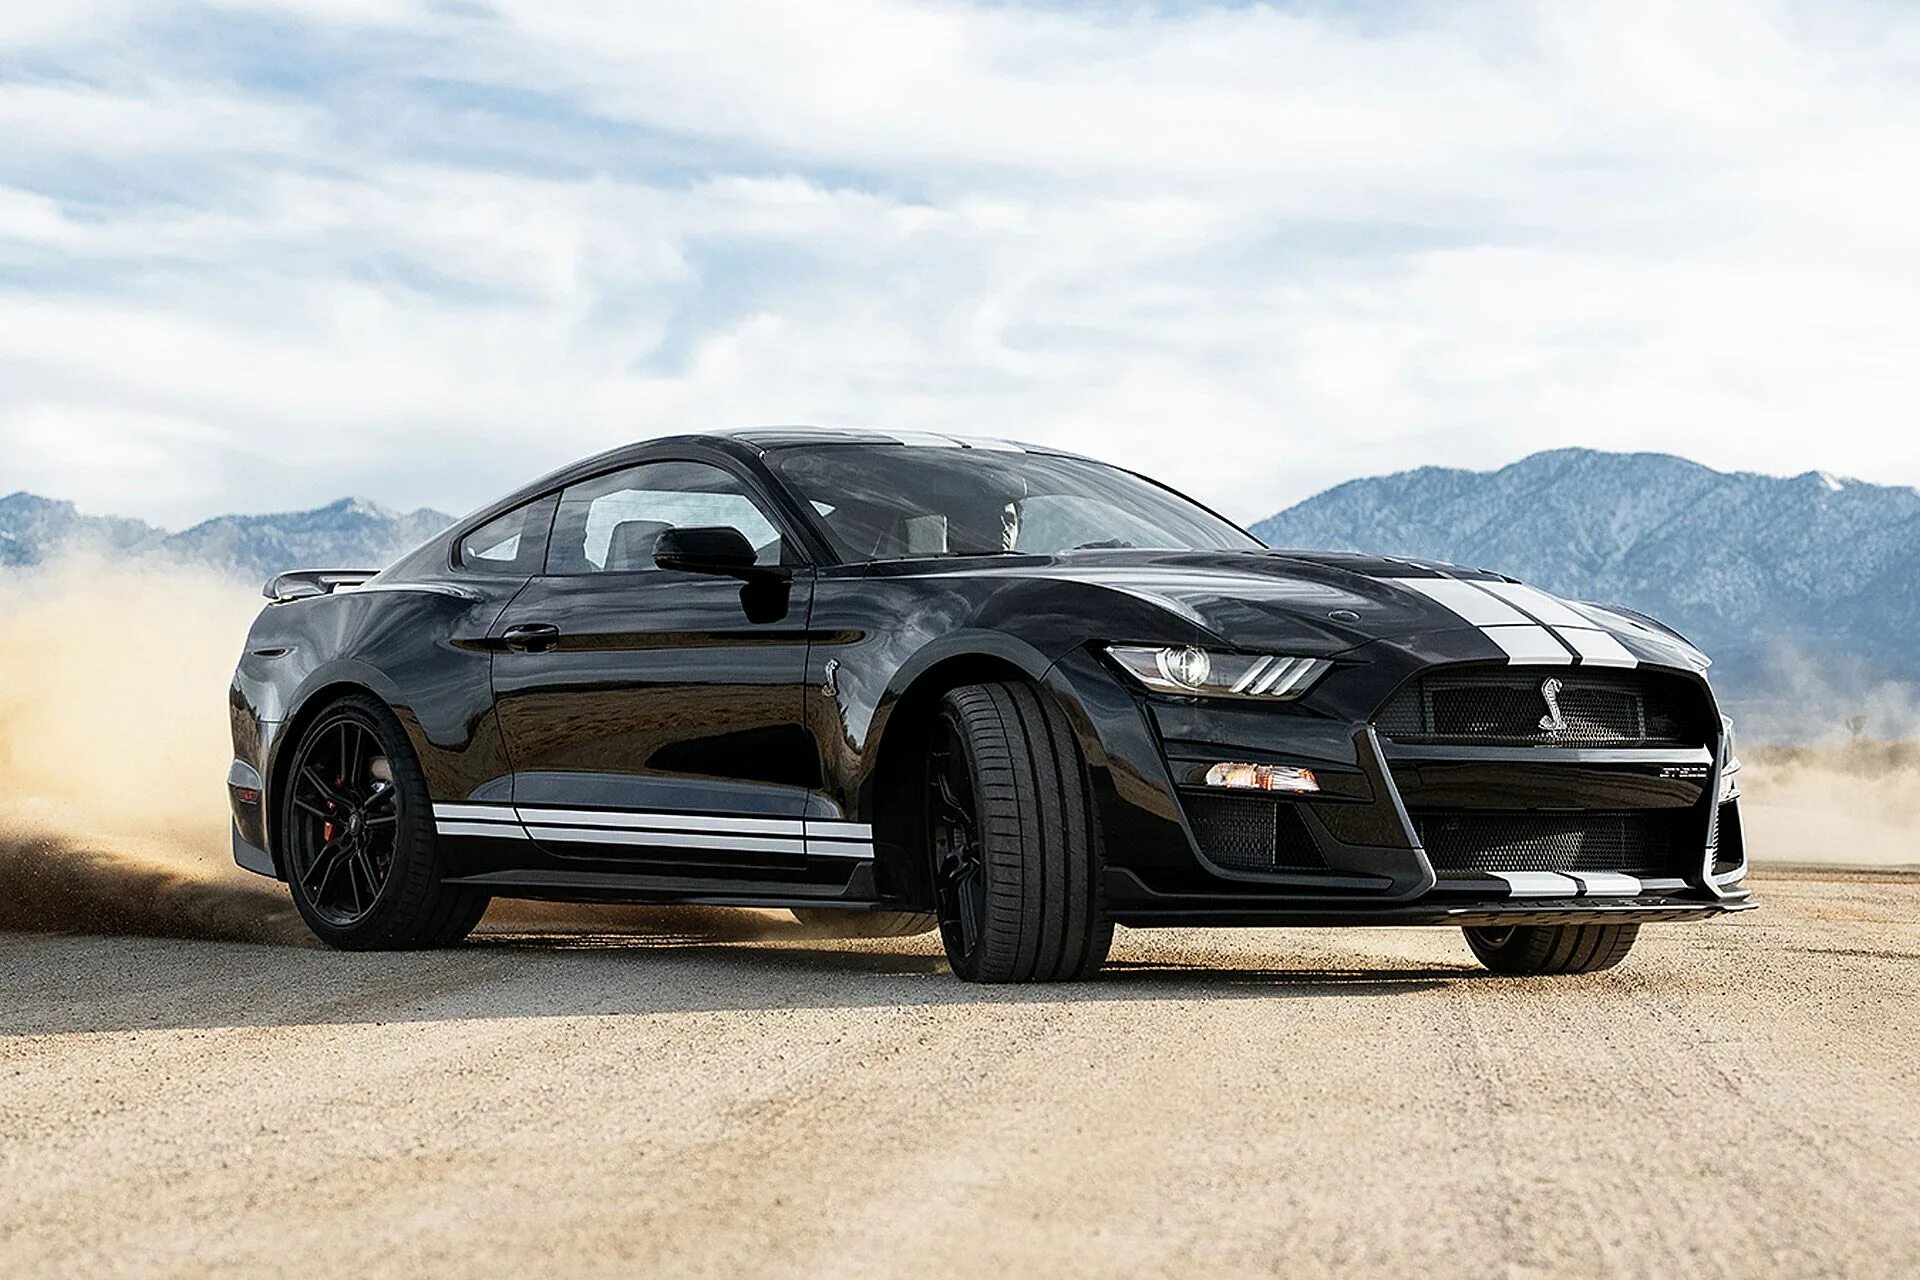 Mustang shelby gt 500. Форд Мустанг Shelby 2020. Форд Мустанг Шелби 2020. Форд Мустанг Шелби gt 500 2020. Ford Mustang Shelby gt500 2020.